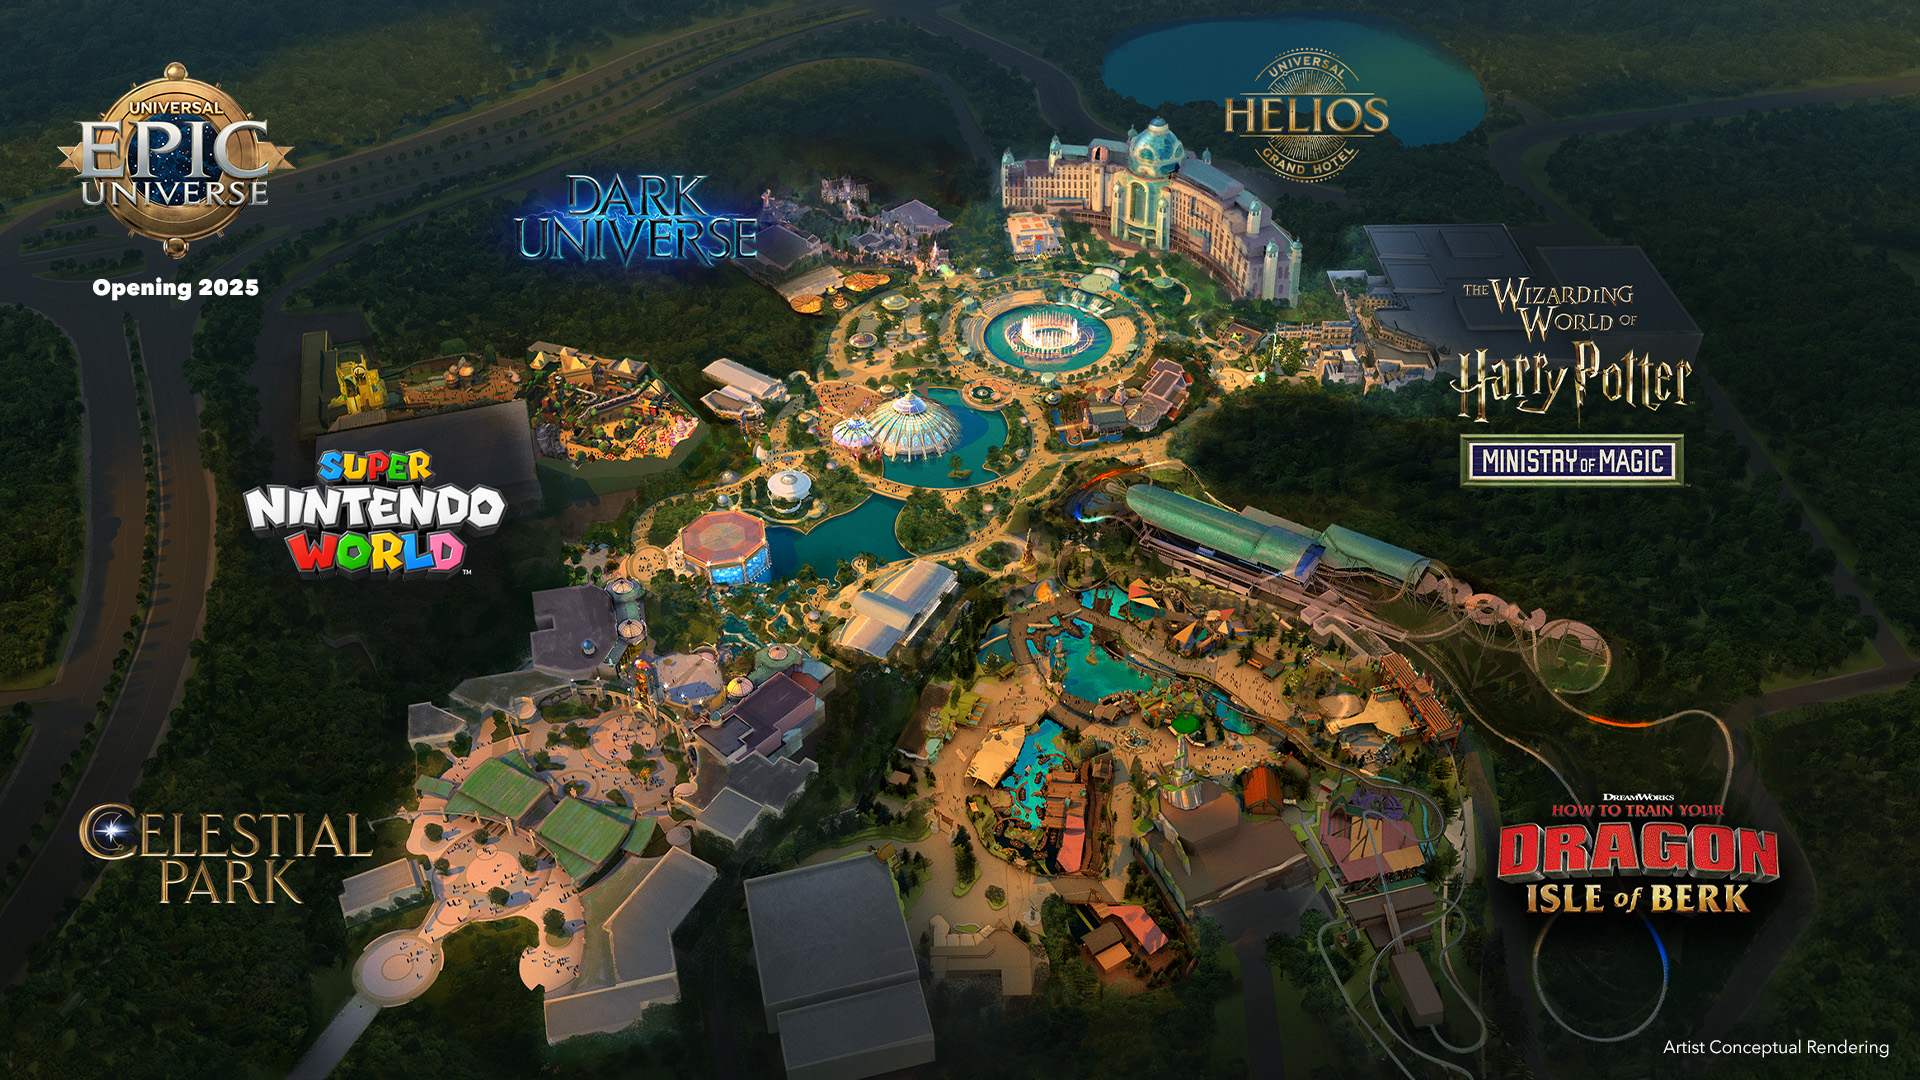 Rendering of Universal Epic Universe showing an aerial view of the five areas